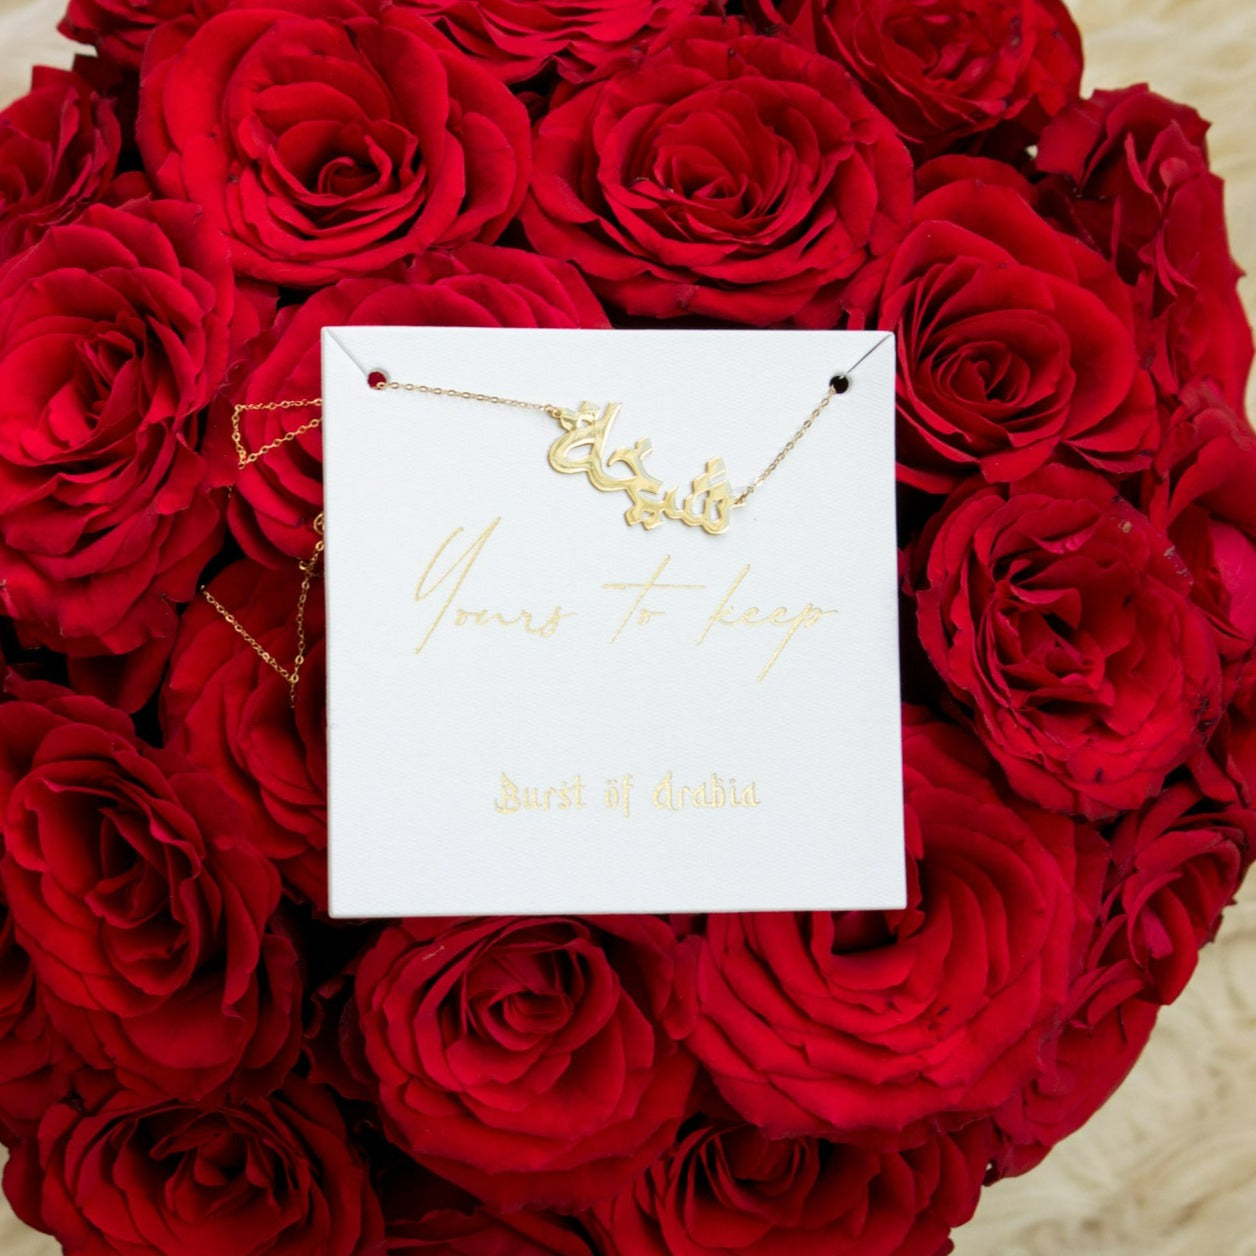 Customized gifts in Dubai, Abu Dhabi, UAE. Order personalized jewelry for women. Luxury gift for wife, birthday gift for girlfriend, anniversary gifts for her.